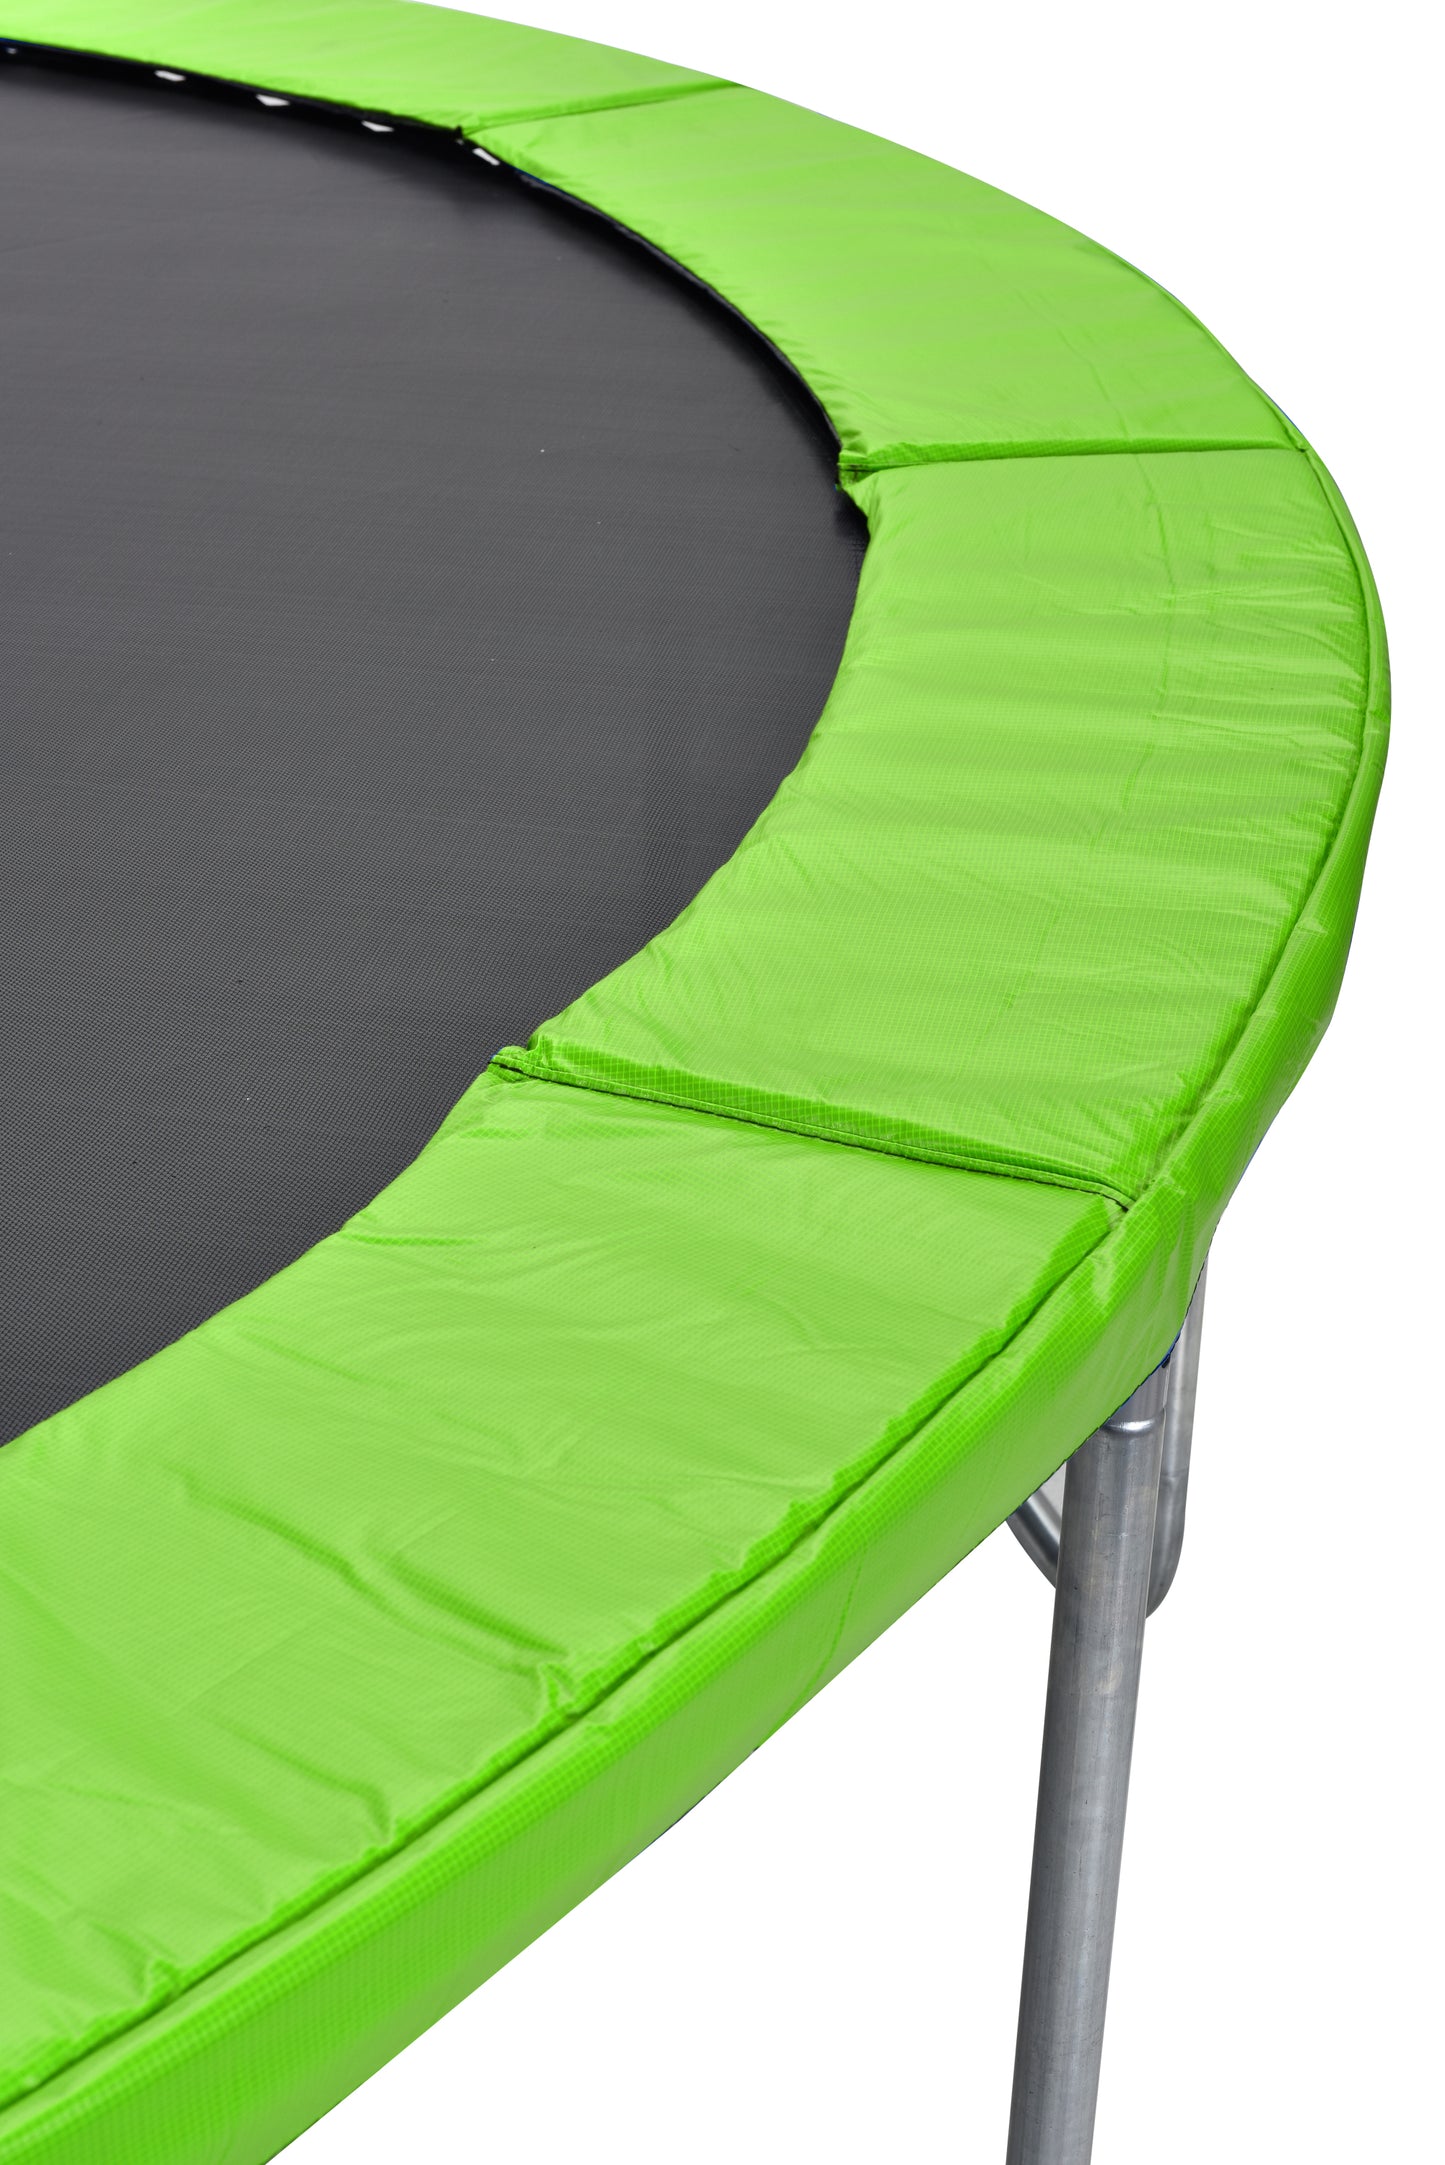 Green Tramp with Hoop: Outdoor Fun for All